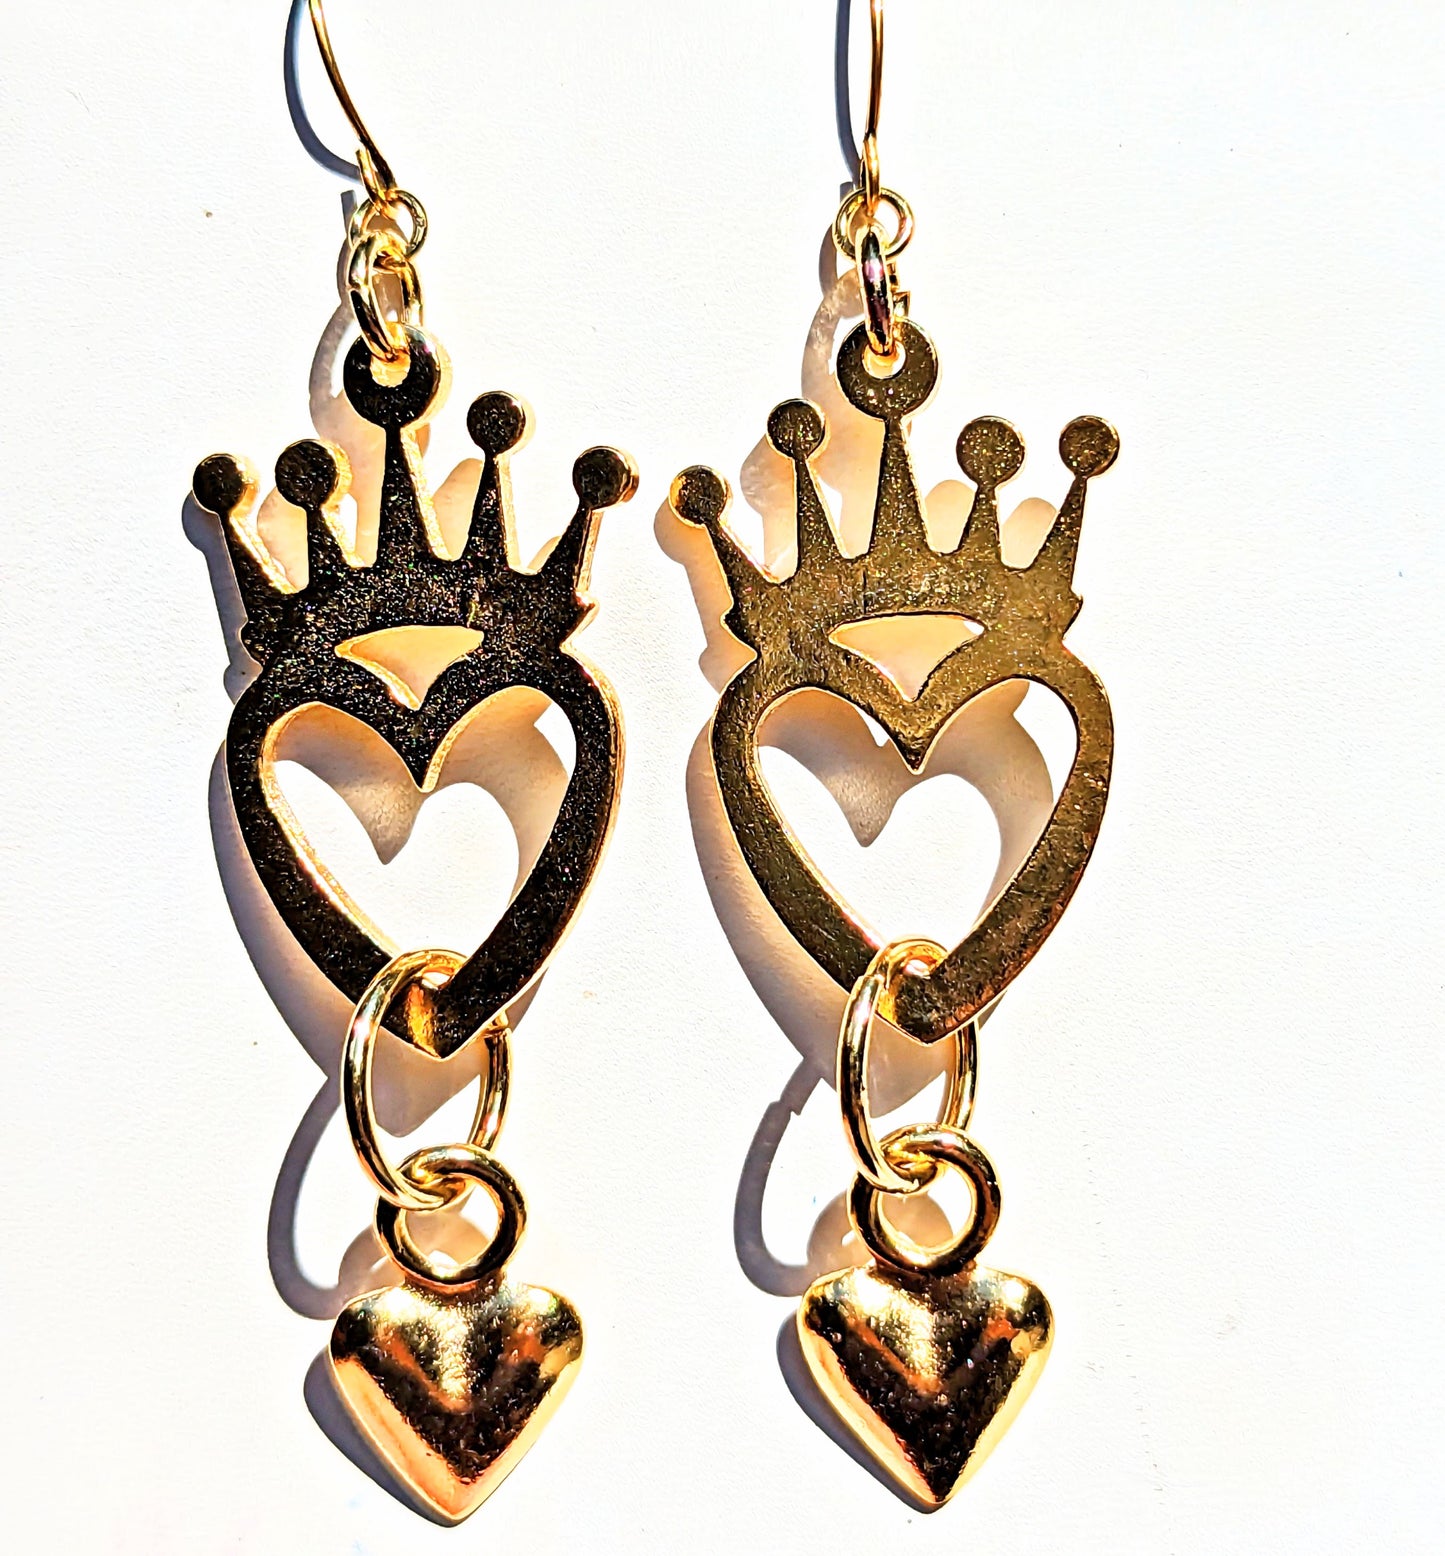 Beautiful Gold Plated Heart and Crown Designer Earrings 3.7 inch Long USA Made by Sugar Gay Isber unisex-adult